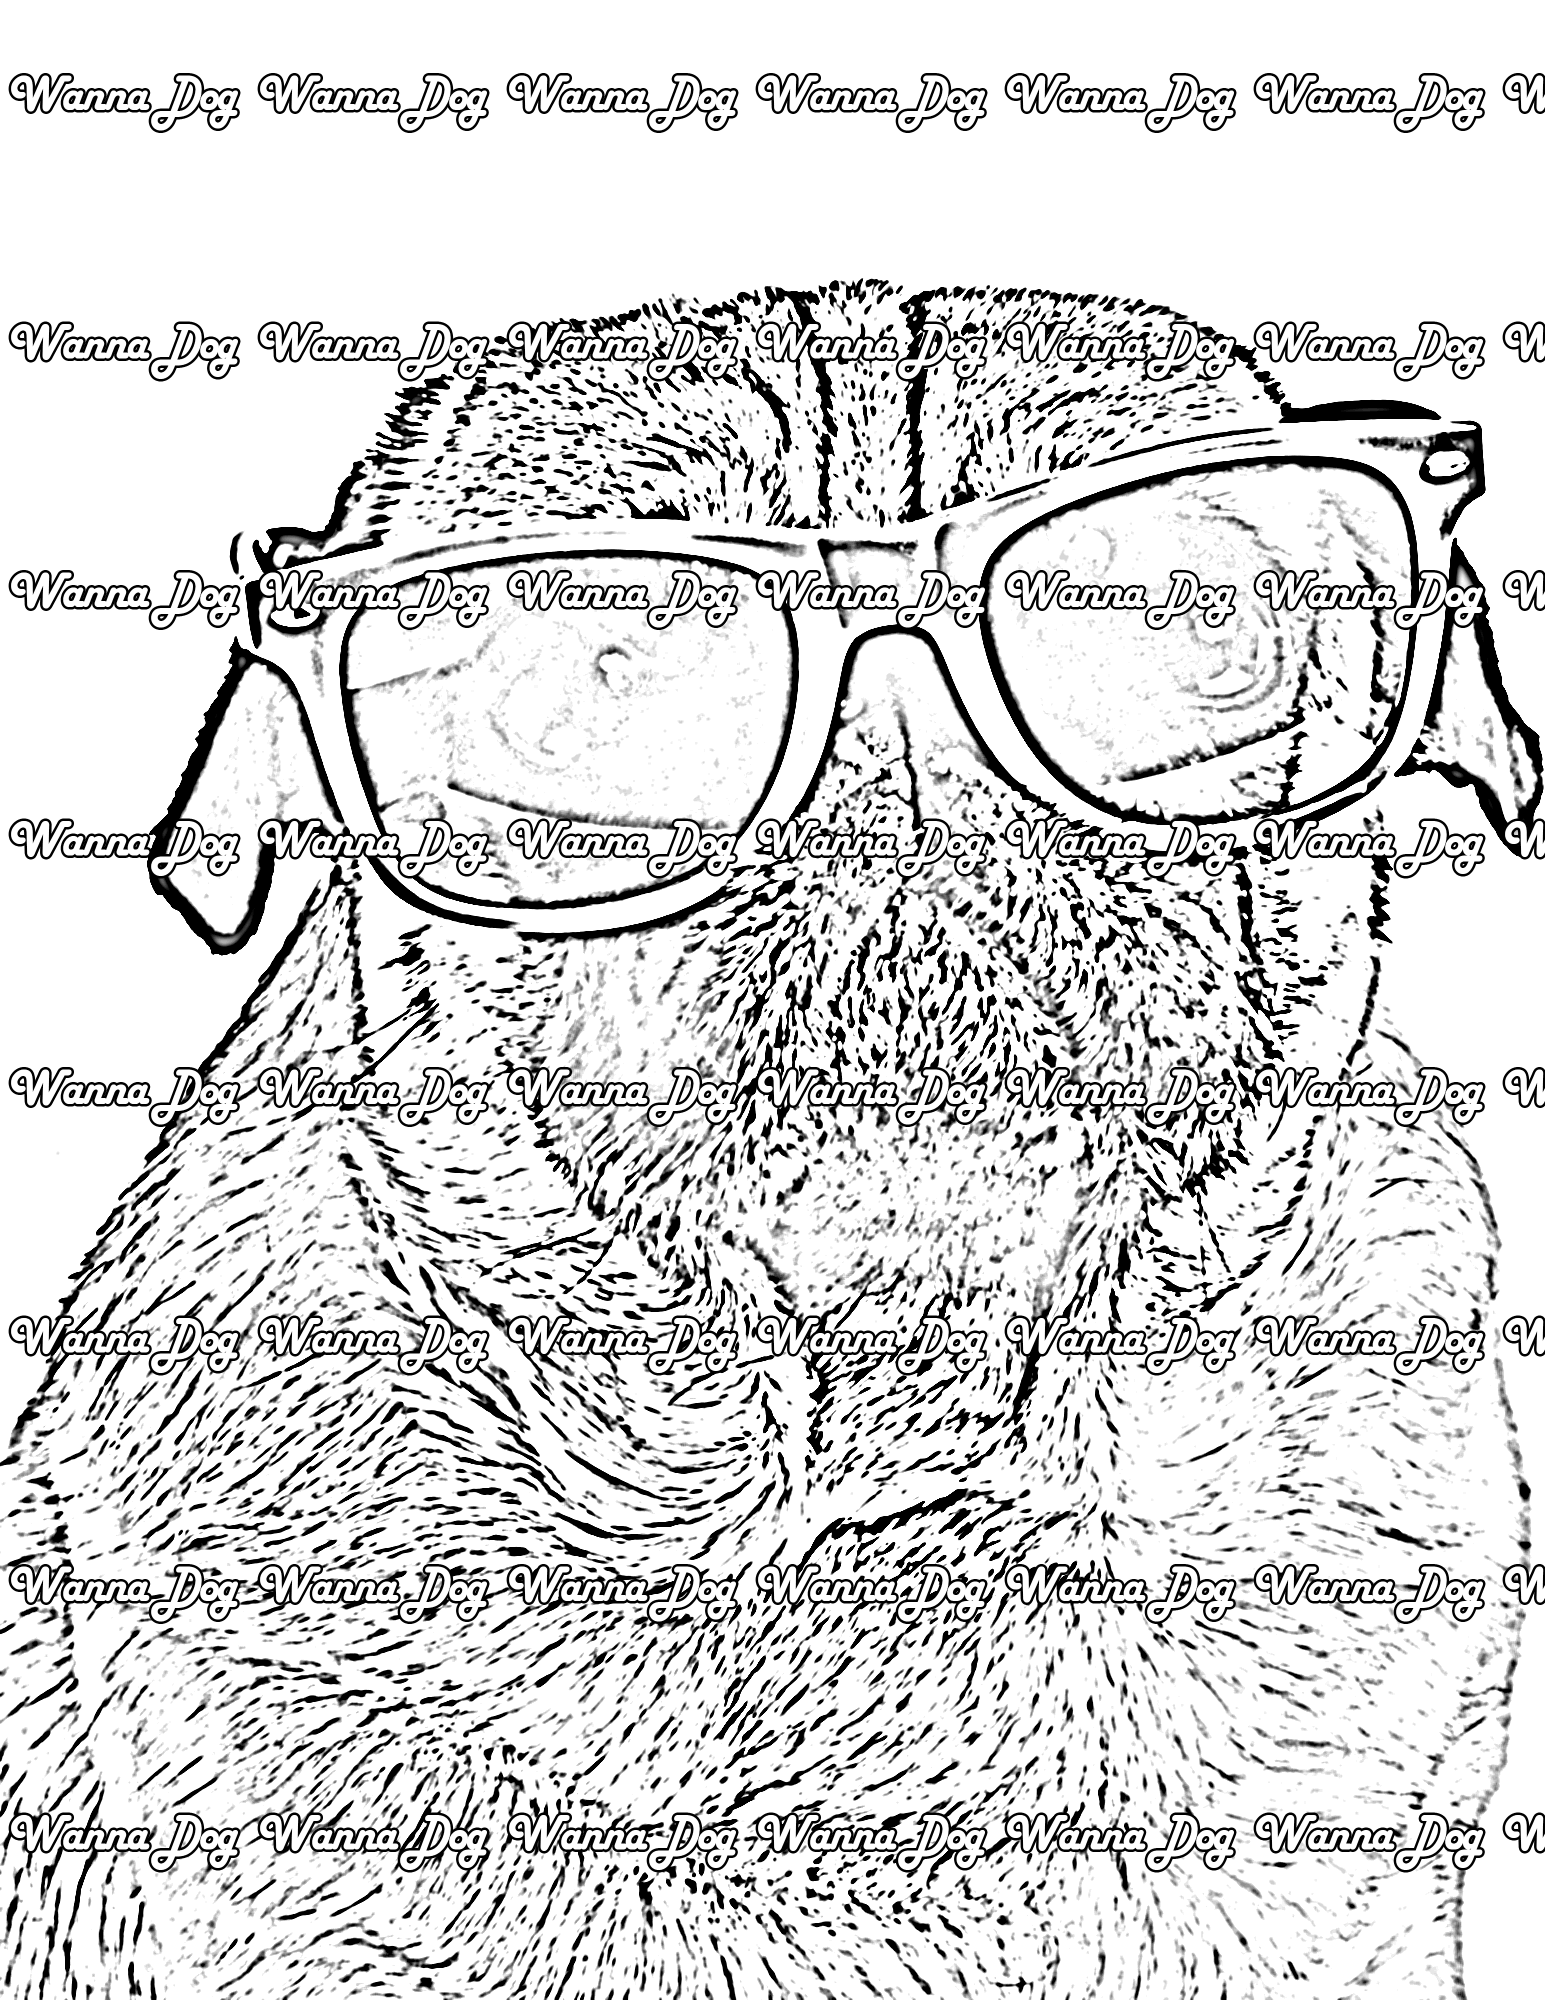 A Pug Coloring Page of a pug wearing sunglasses